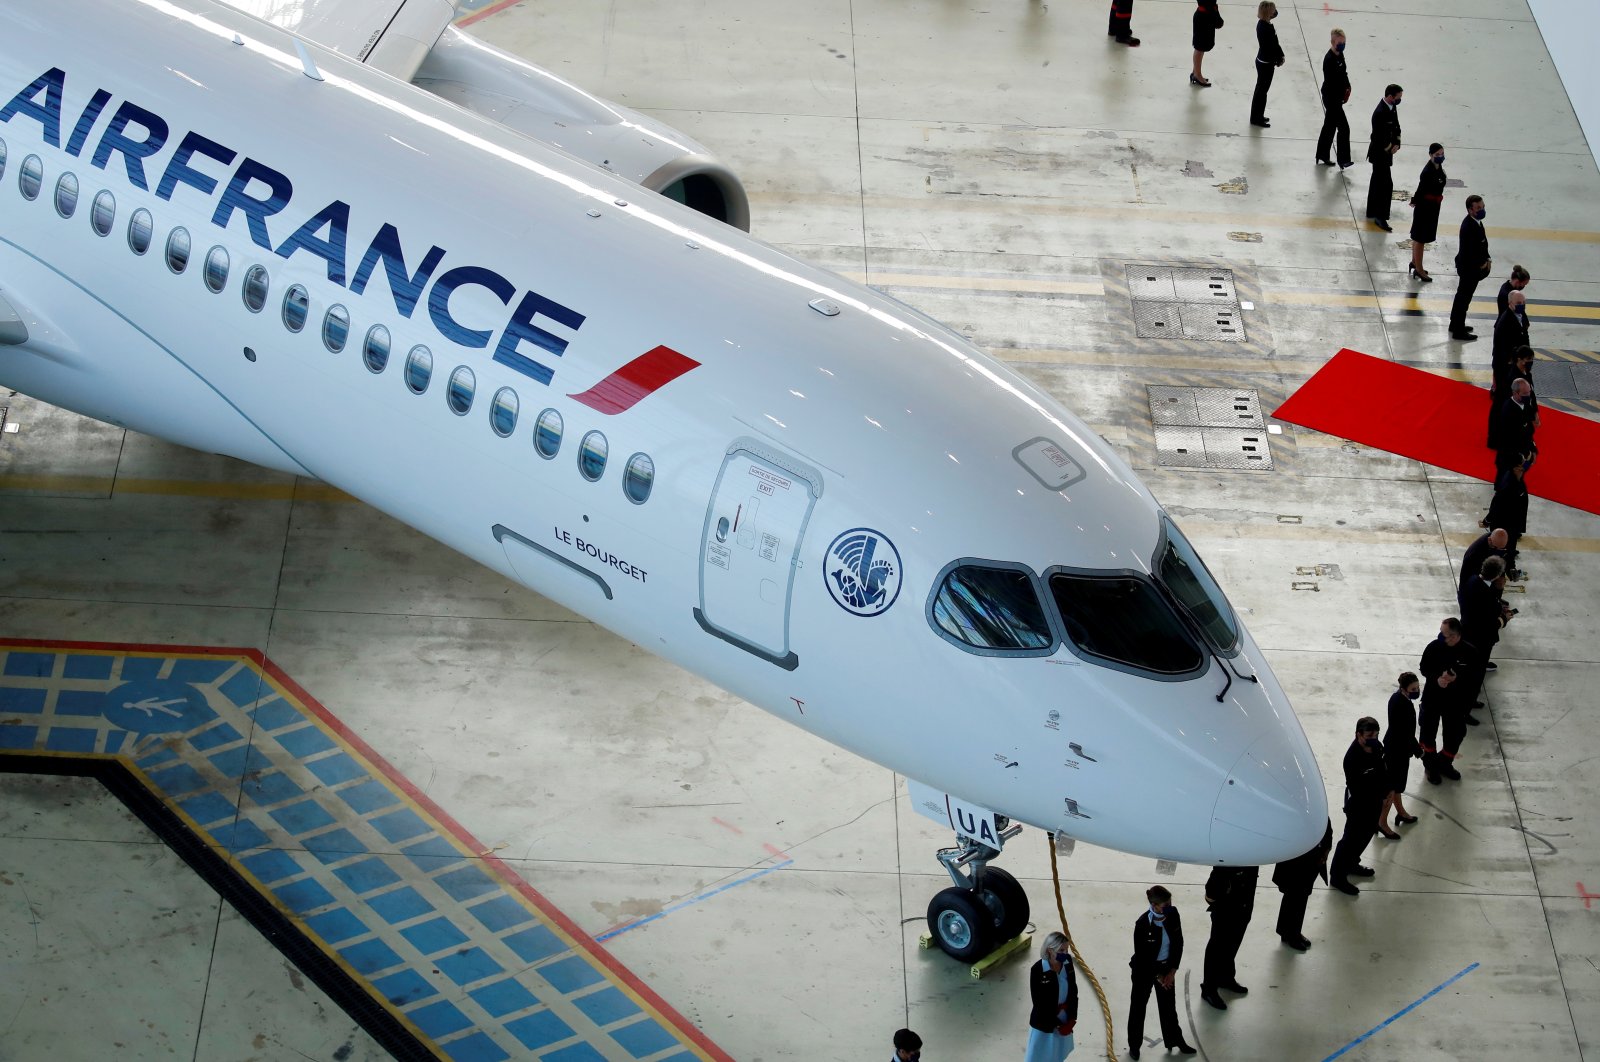 Air France employees stand around the first Air France airliner's Airbus A220 during a ceremony in the Air France hangar at Paris Charles de Gaulle airport in Roissy near Paris, France, Sept. 29, 2021. (Reuters Photo)